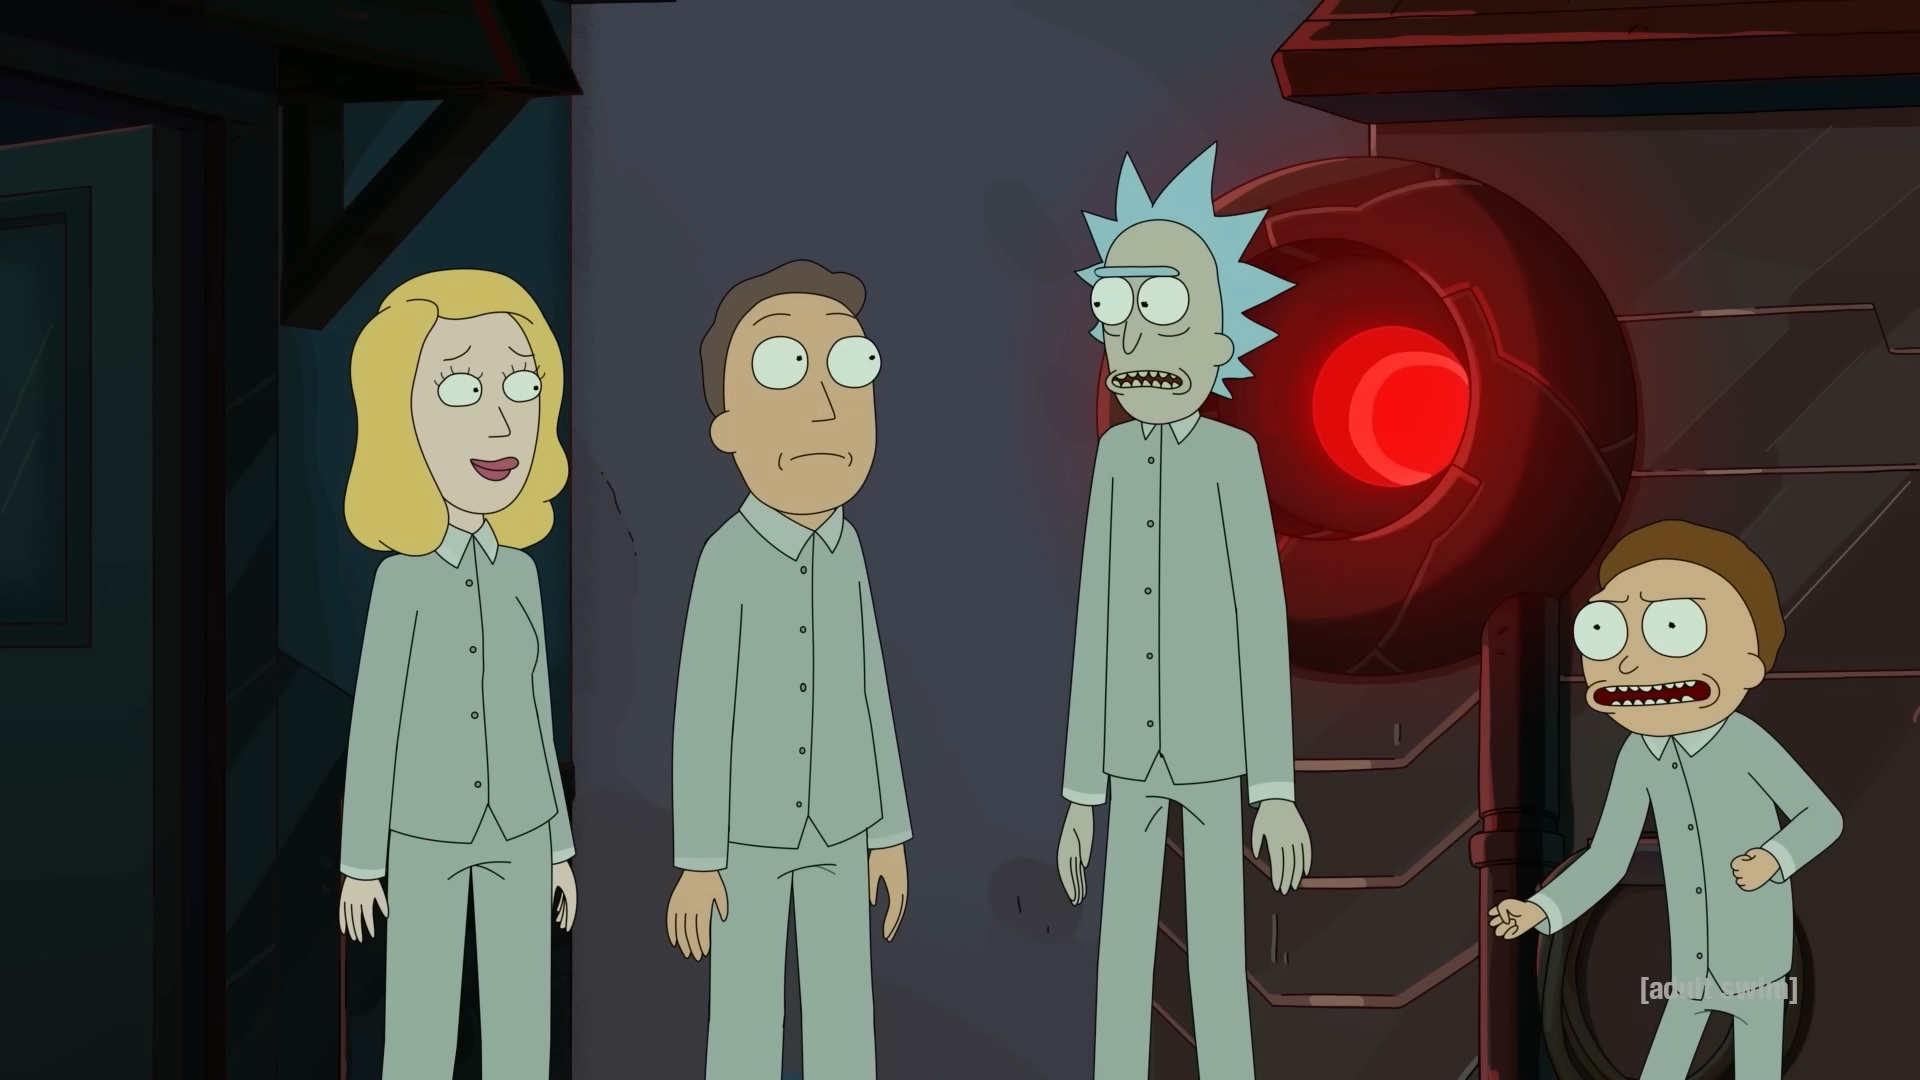 Rick and Morty: Season 6 is getting closer and the co-creator says it will be "incredible and of quality"